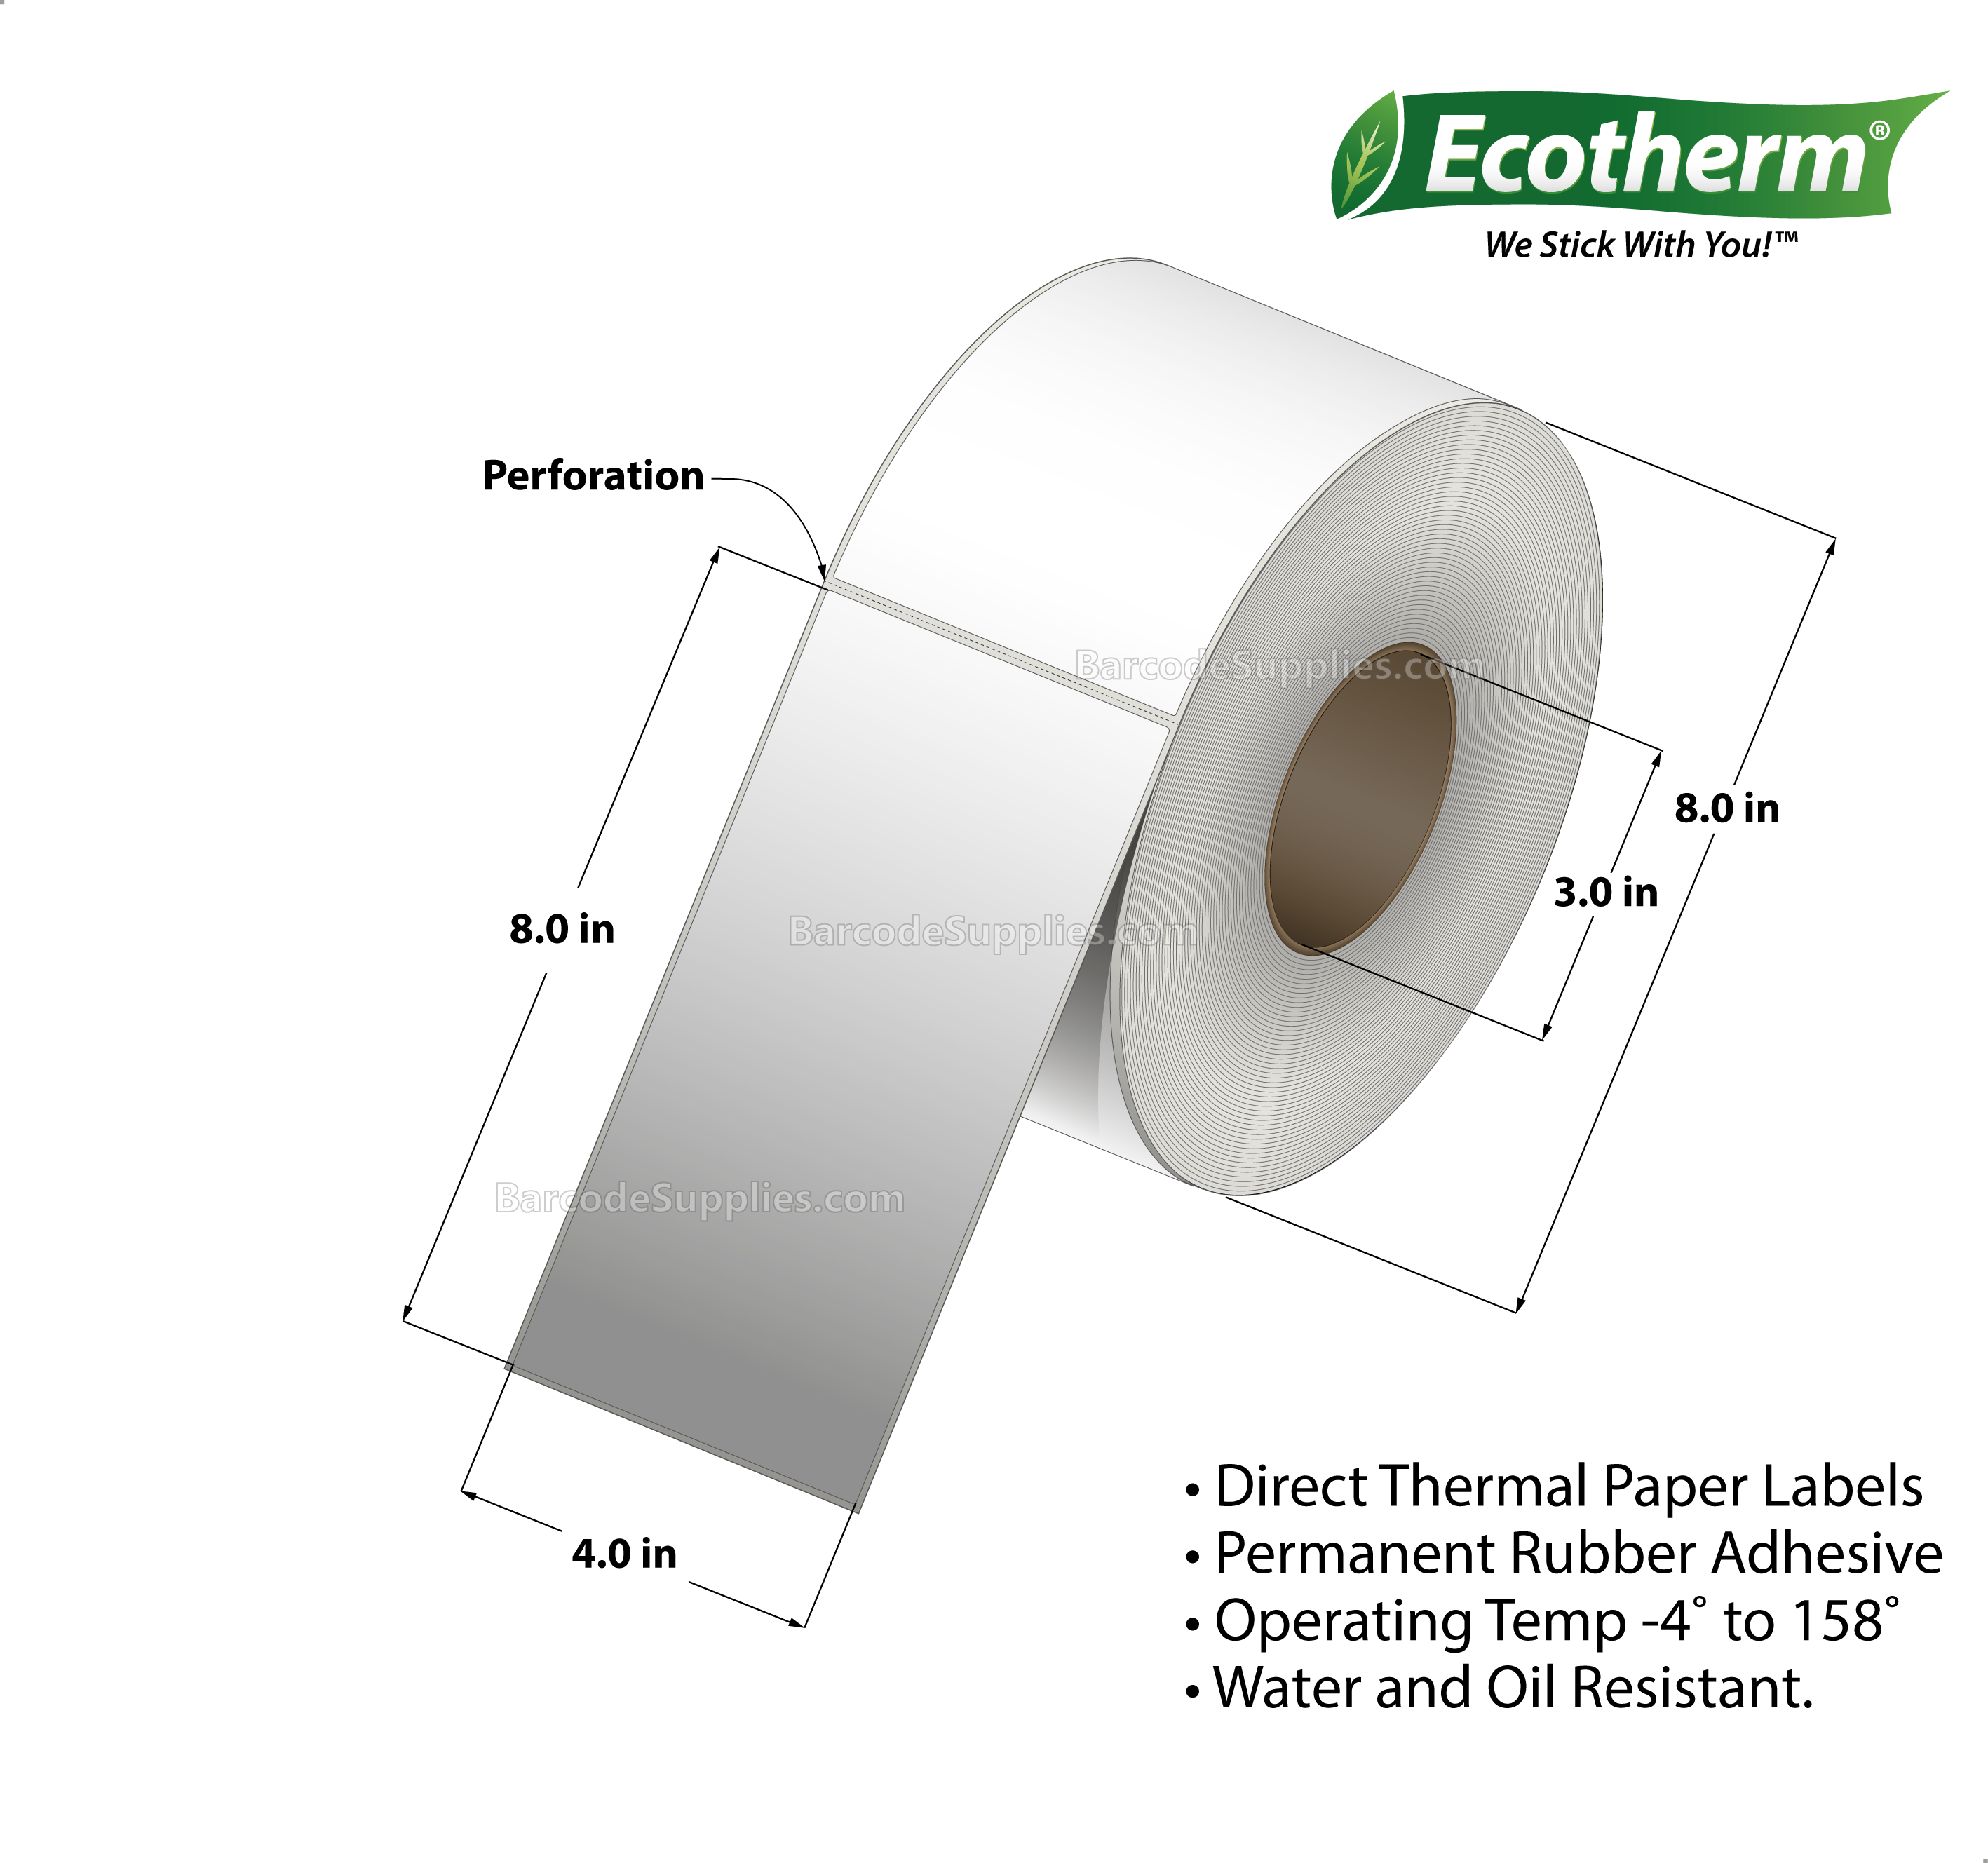 4 x 8 Direct Thermal White Labels With Rubber Adhesive - Perforated - 890 Labels Per Roll - Carton Of 4 Rolls - 3560 Labels Total - MPN: DT8400800-3P-4